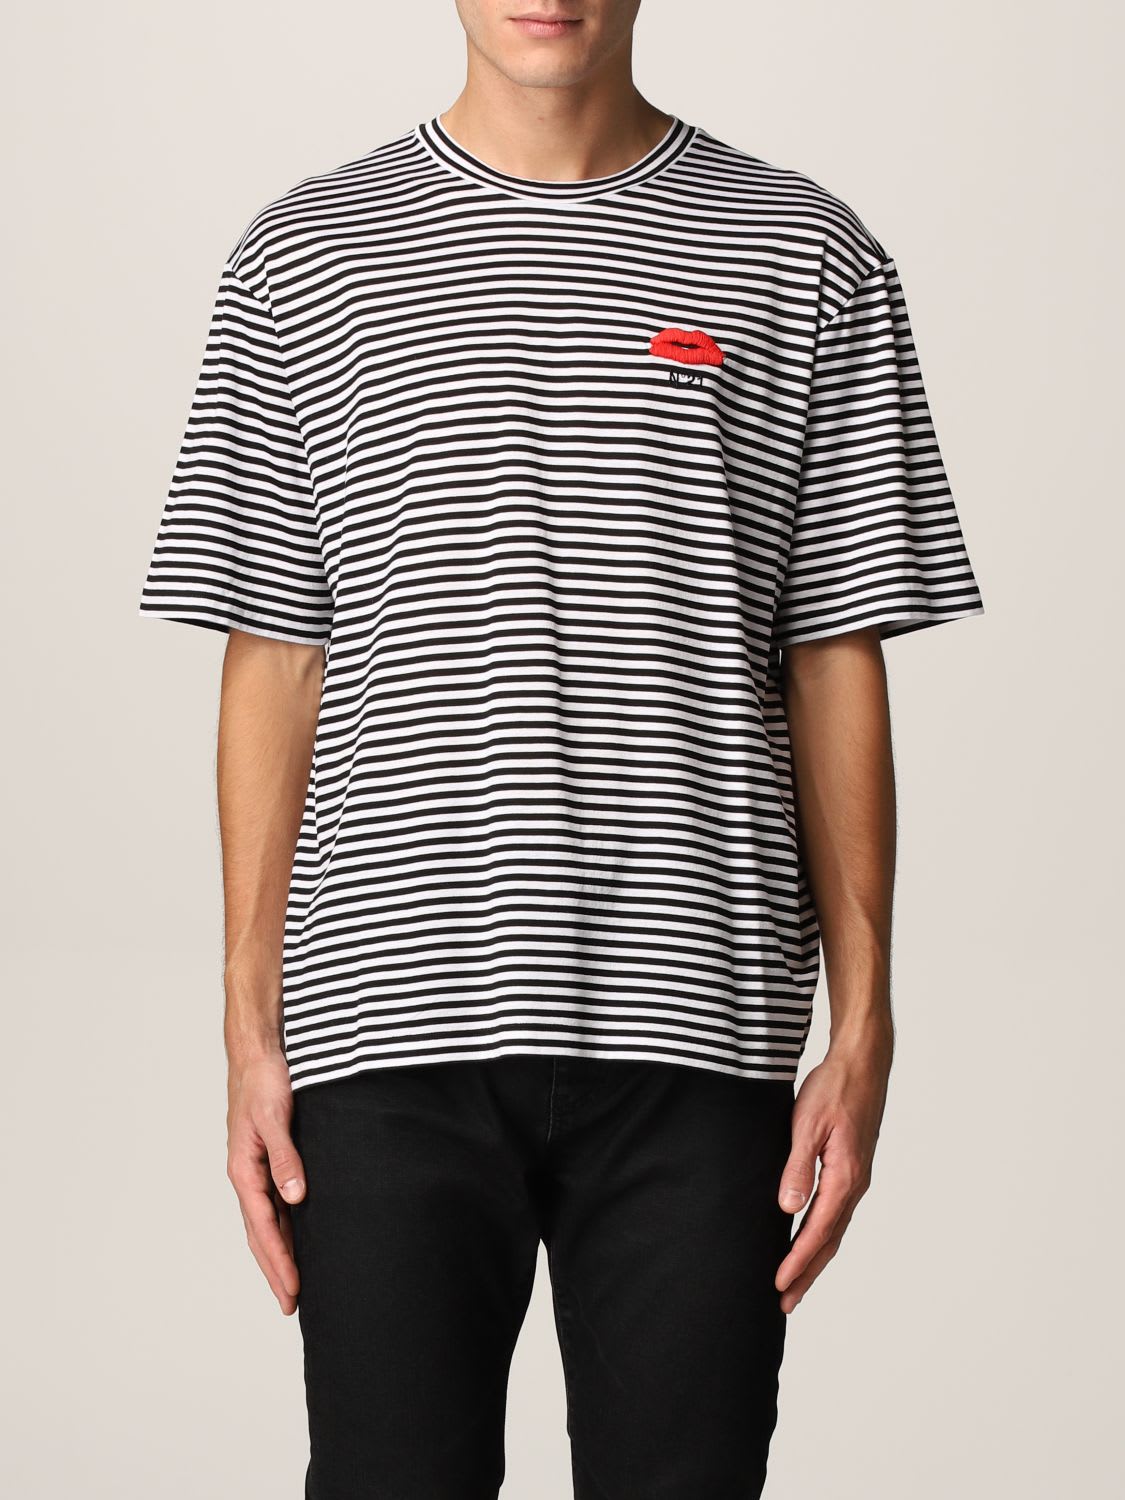 N.21 N° 21 T-shirt N ° 21 Striped Cotton T-shirt With Embroidery